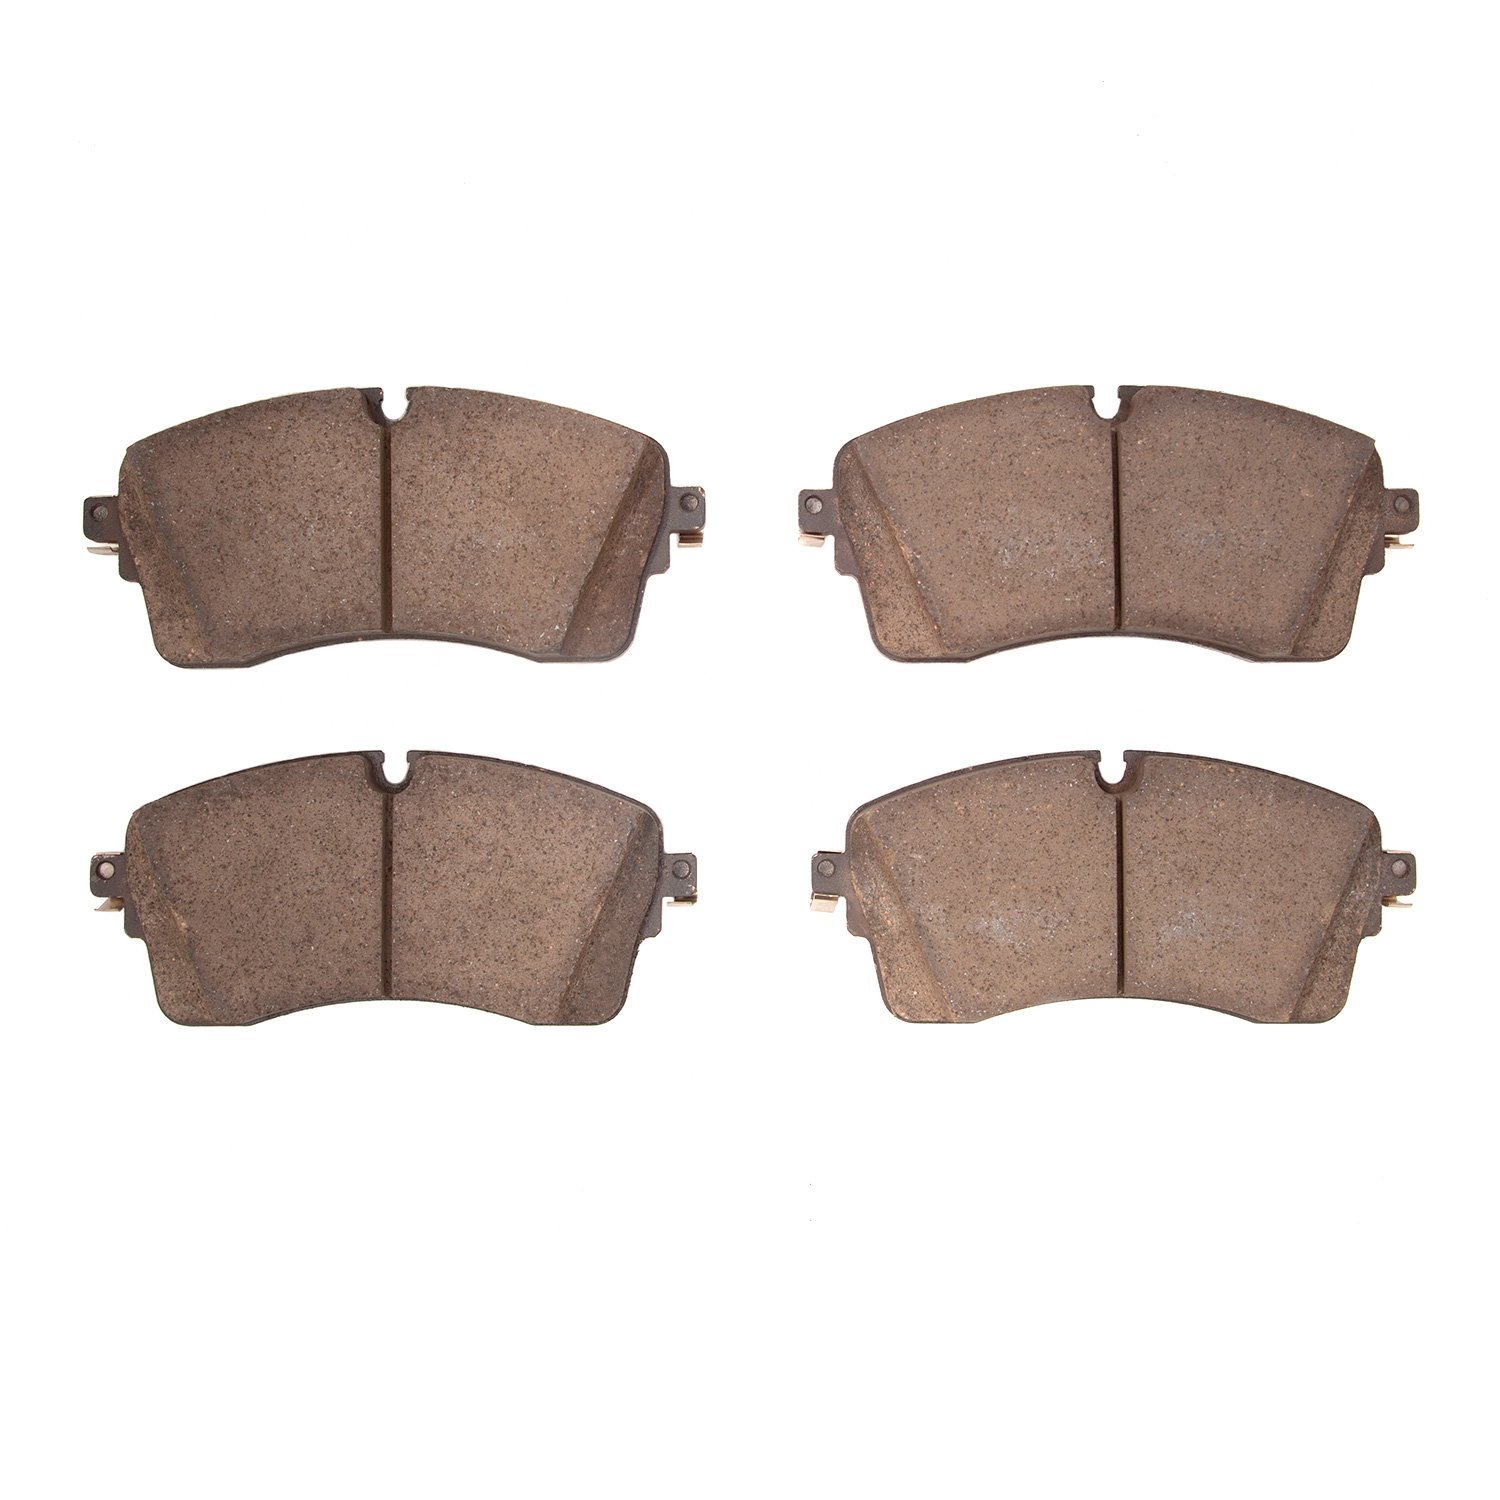 Optimum OE Brake Pads, Fits Select Fits Multiple Makes/Models, Position: Front